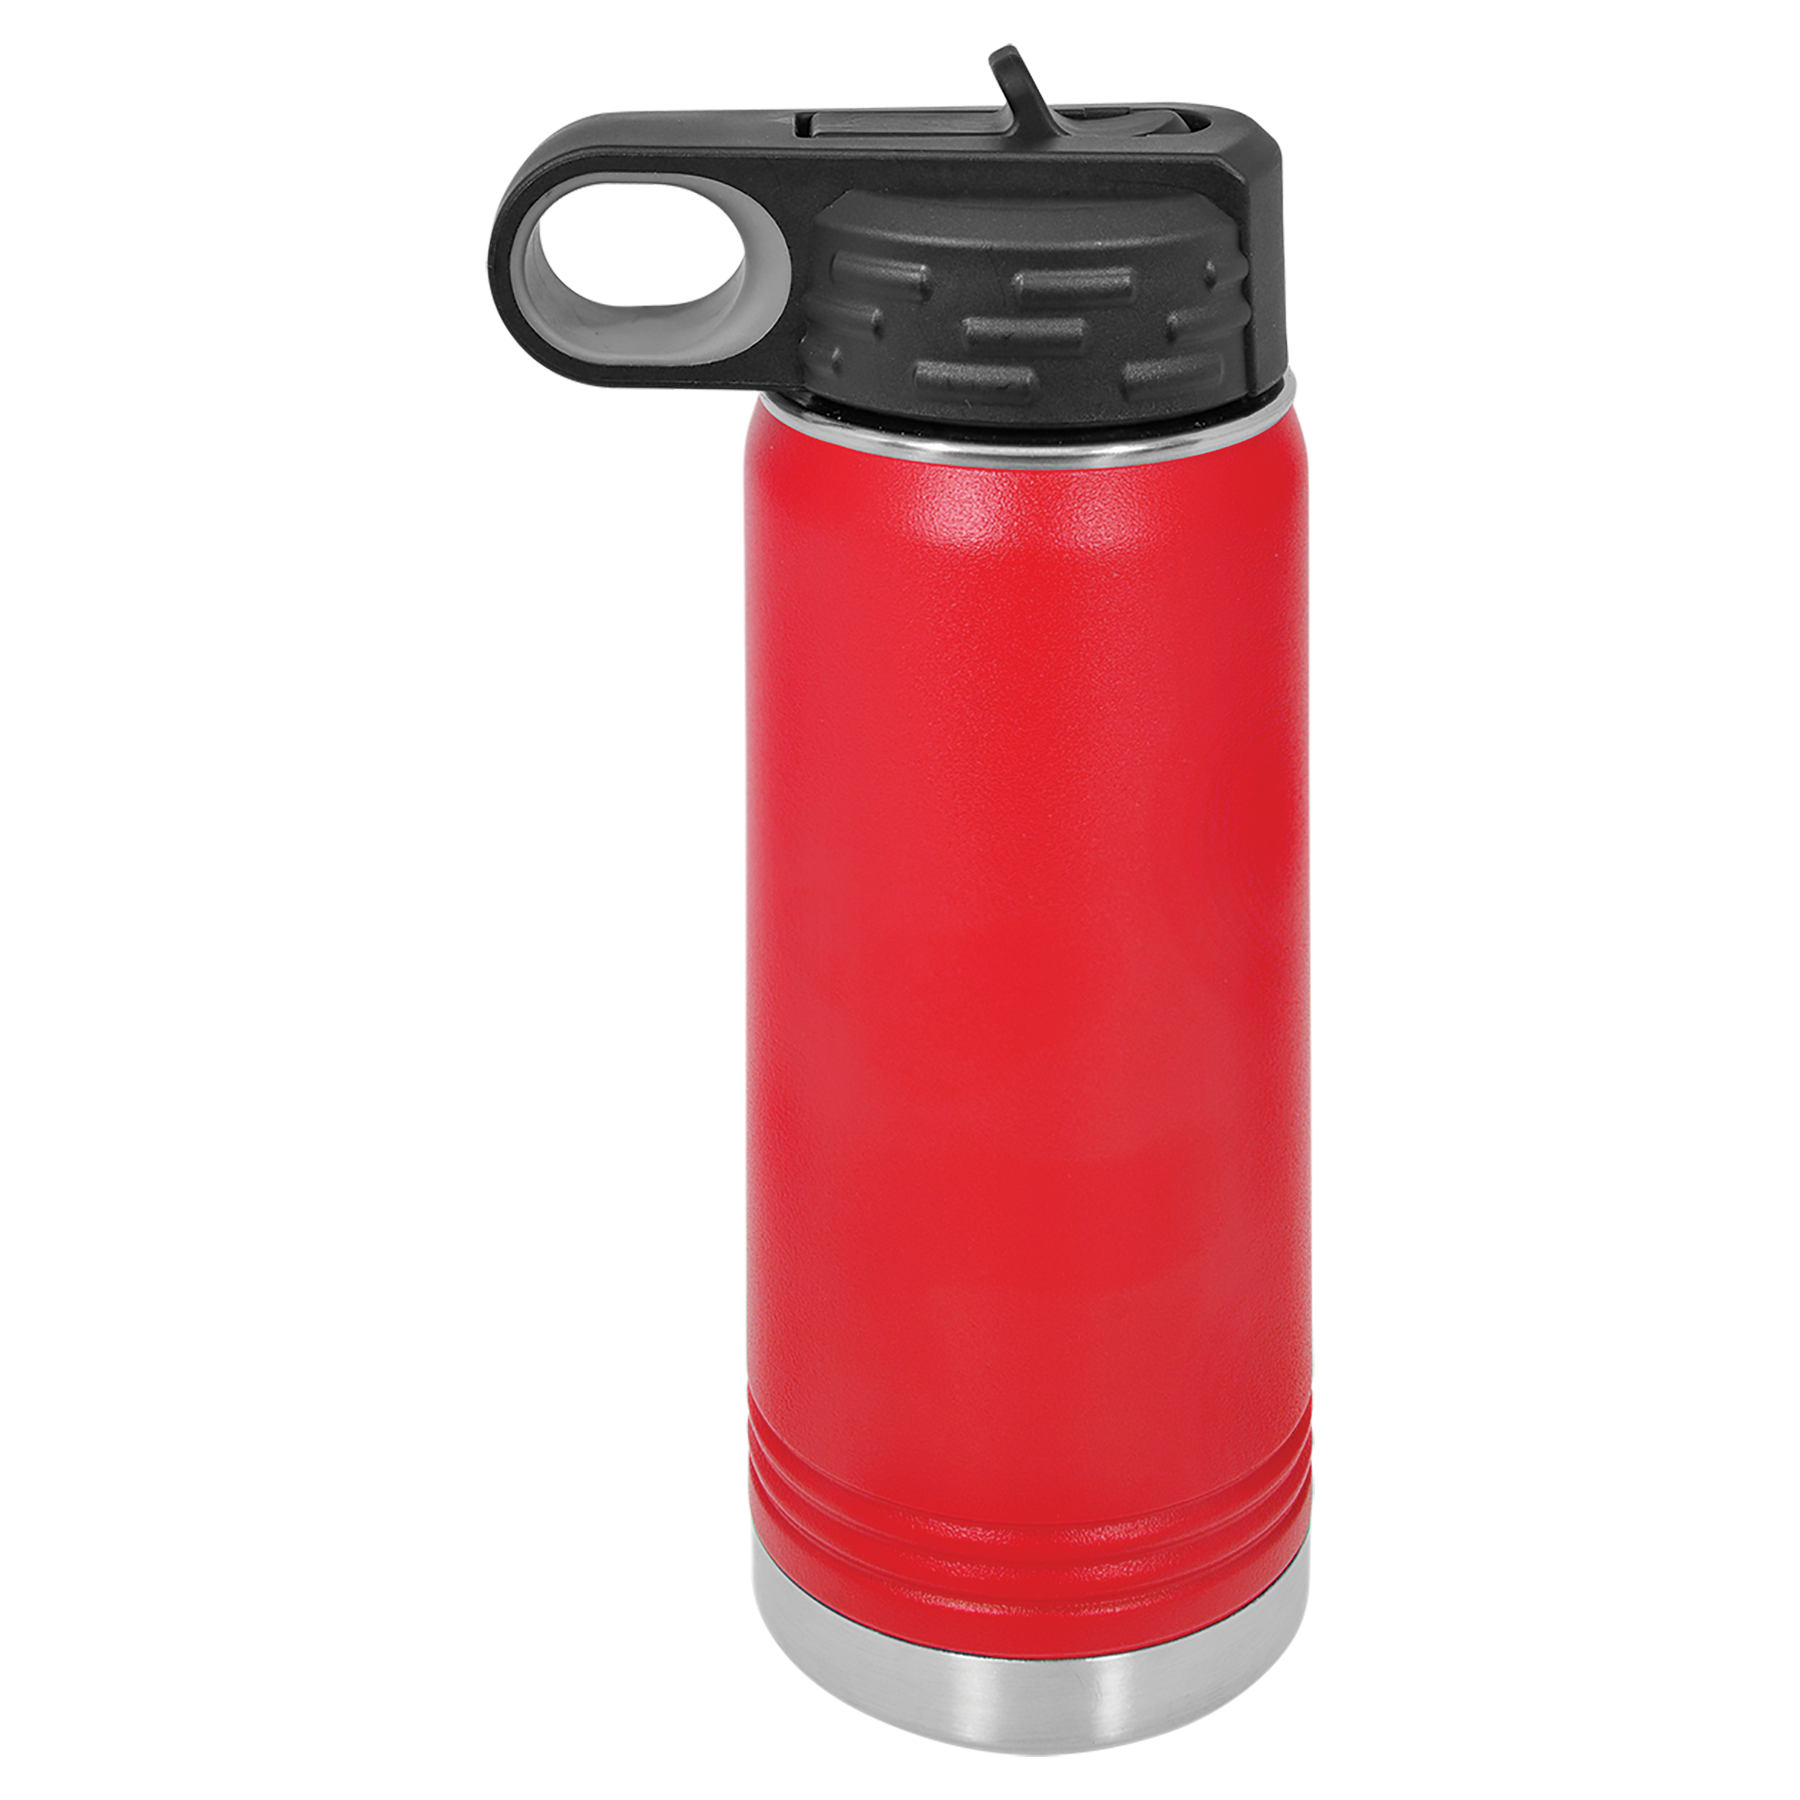 Red 20oz Water Bottle -One Free Engraving -Double-wall Vacuum Insulated -Made from 18/8 Gauge Stainless Steel (Type 304 Food Grade) -Lid is BPA Free (Hand Wash Only) -Not recommended for Dishwasher -Works with Cold and Hot Drinks -18 Color Options -Perfect for Personalized Gifts, Awards, Incentives, Swag & Fundraisers